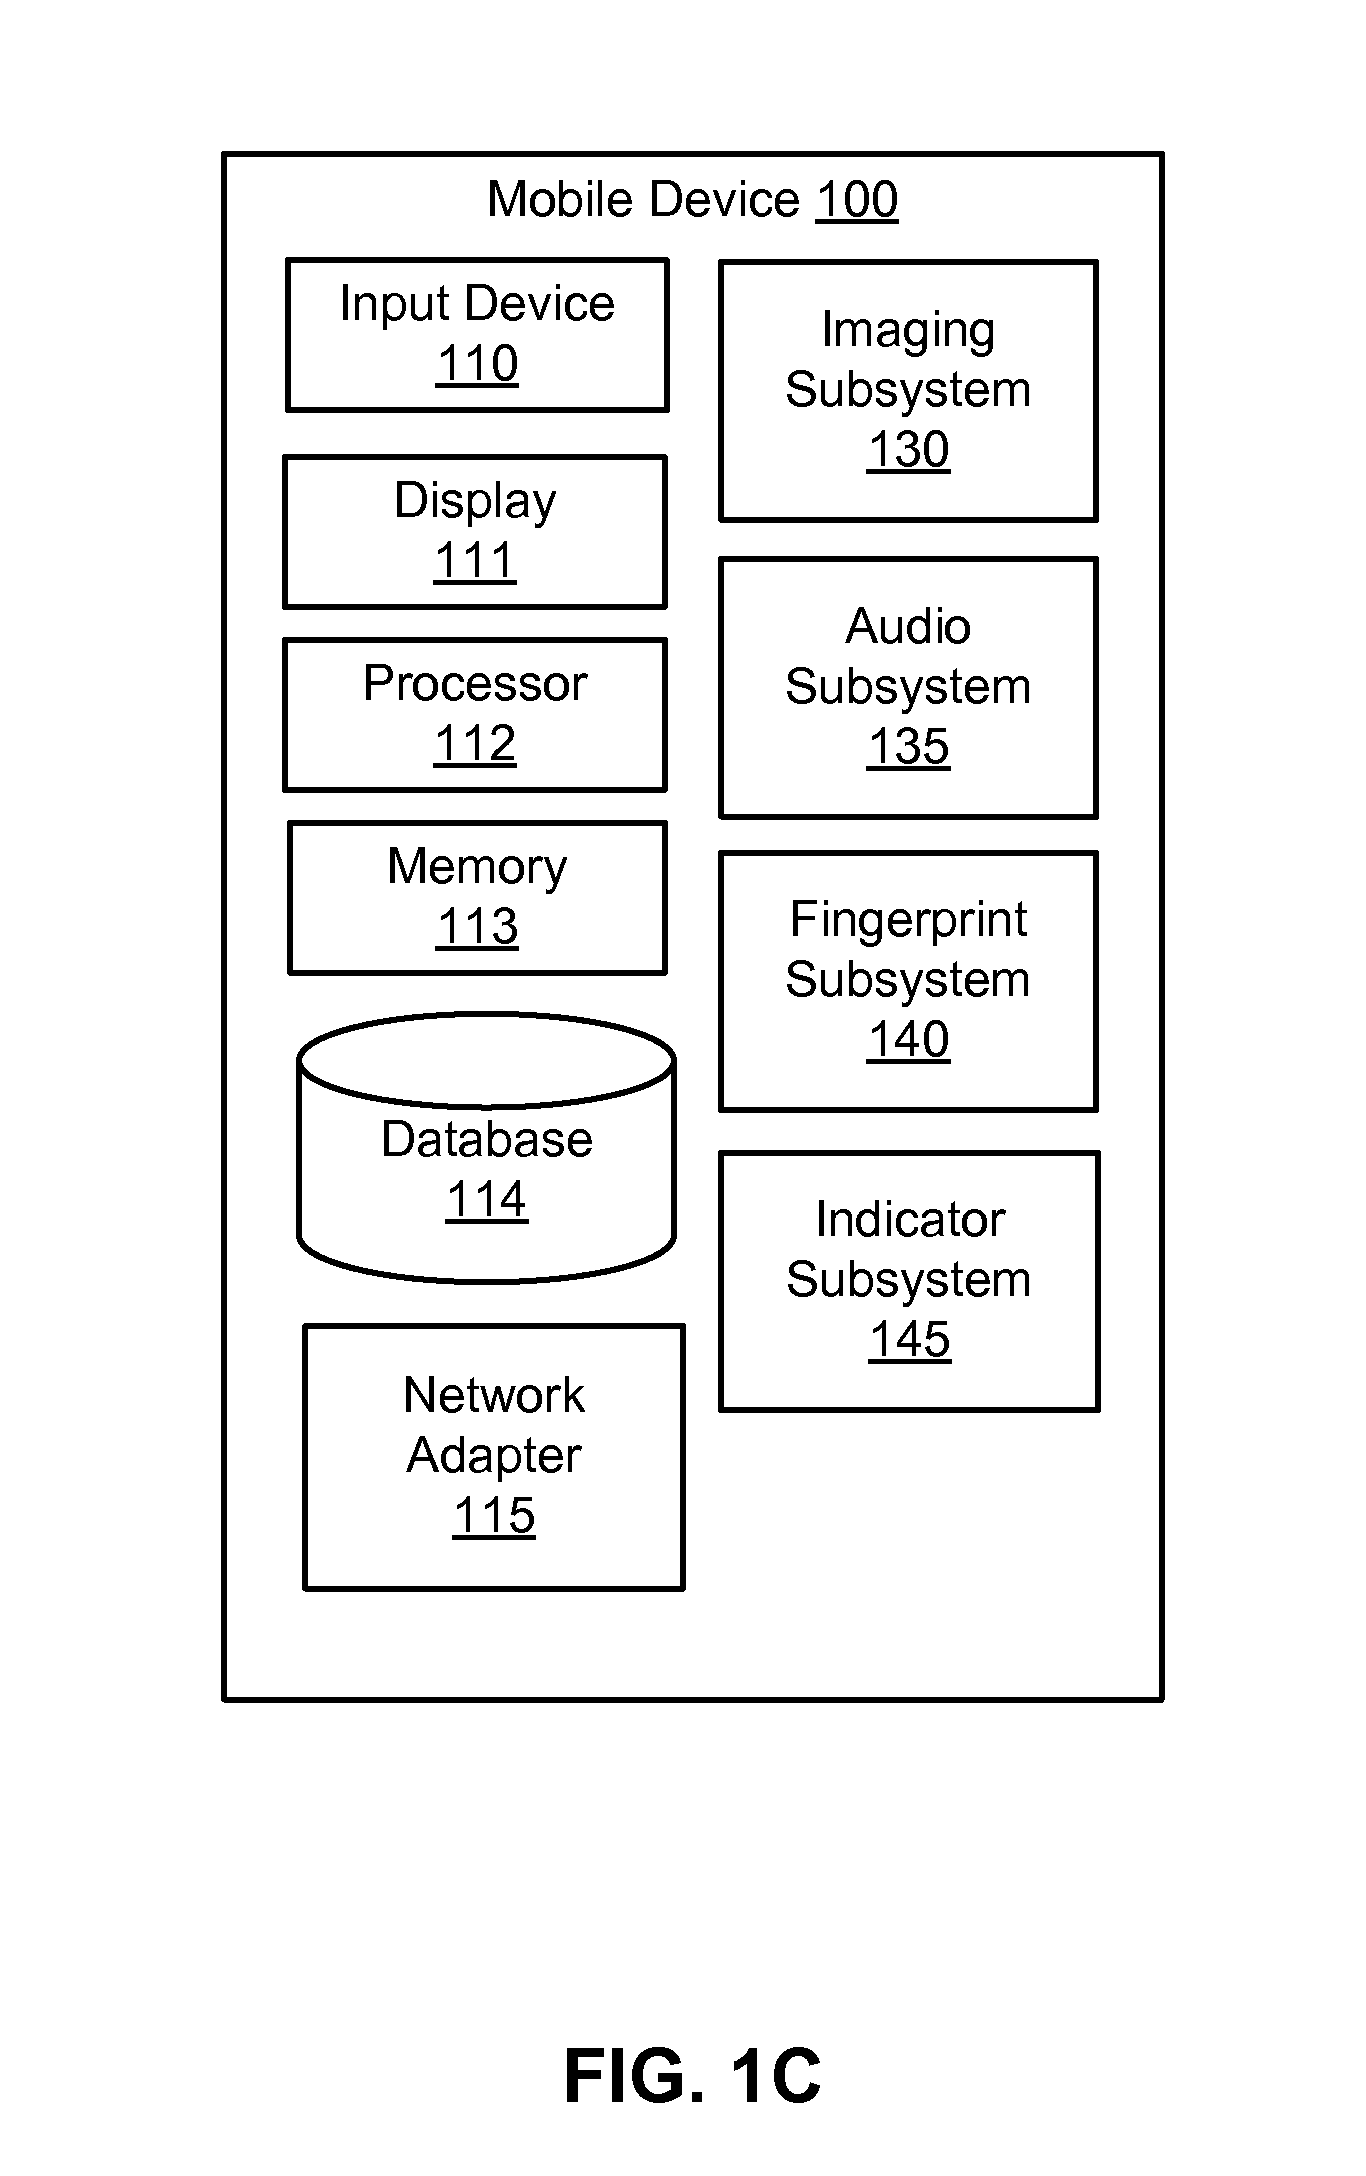 User interface for combined biometric mobile device